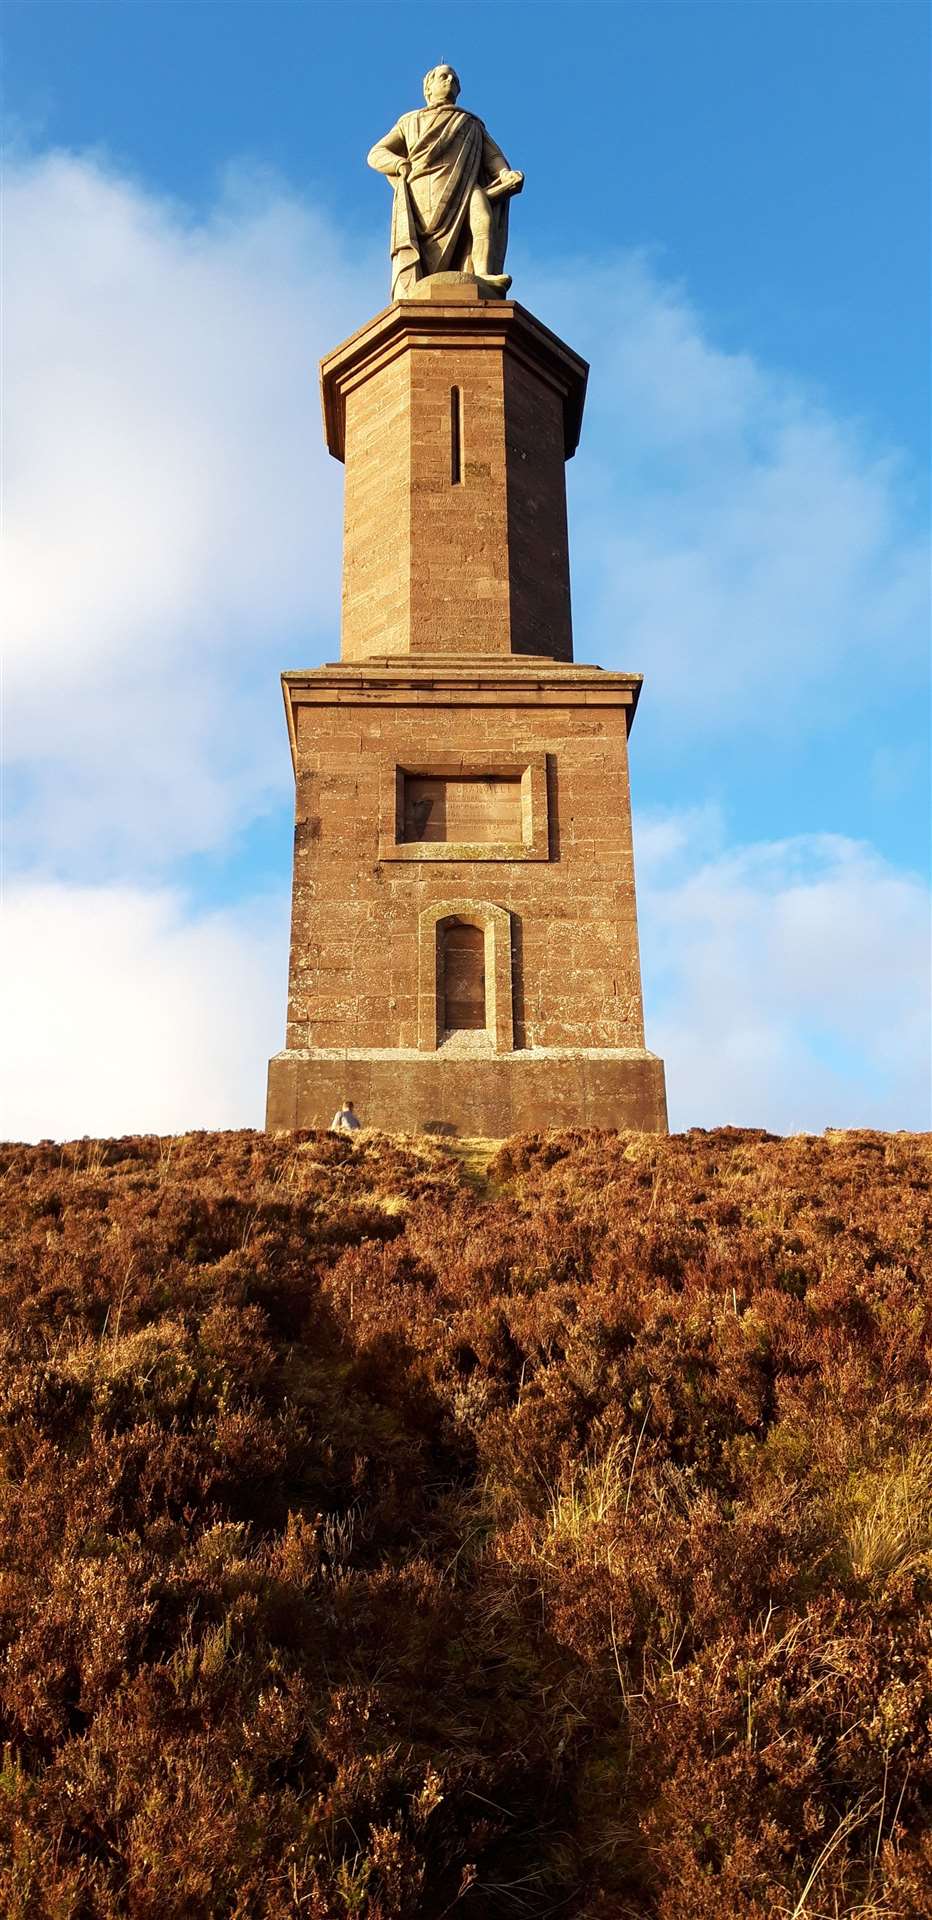 The imposing Duke of Sutherland statue enjoys a commanding position on top of Ben Bhraggie.